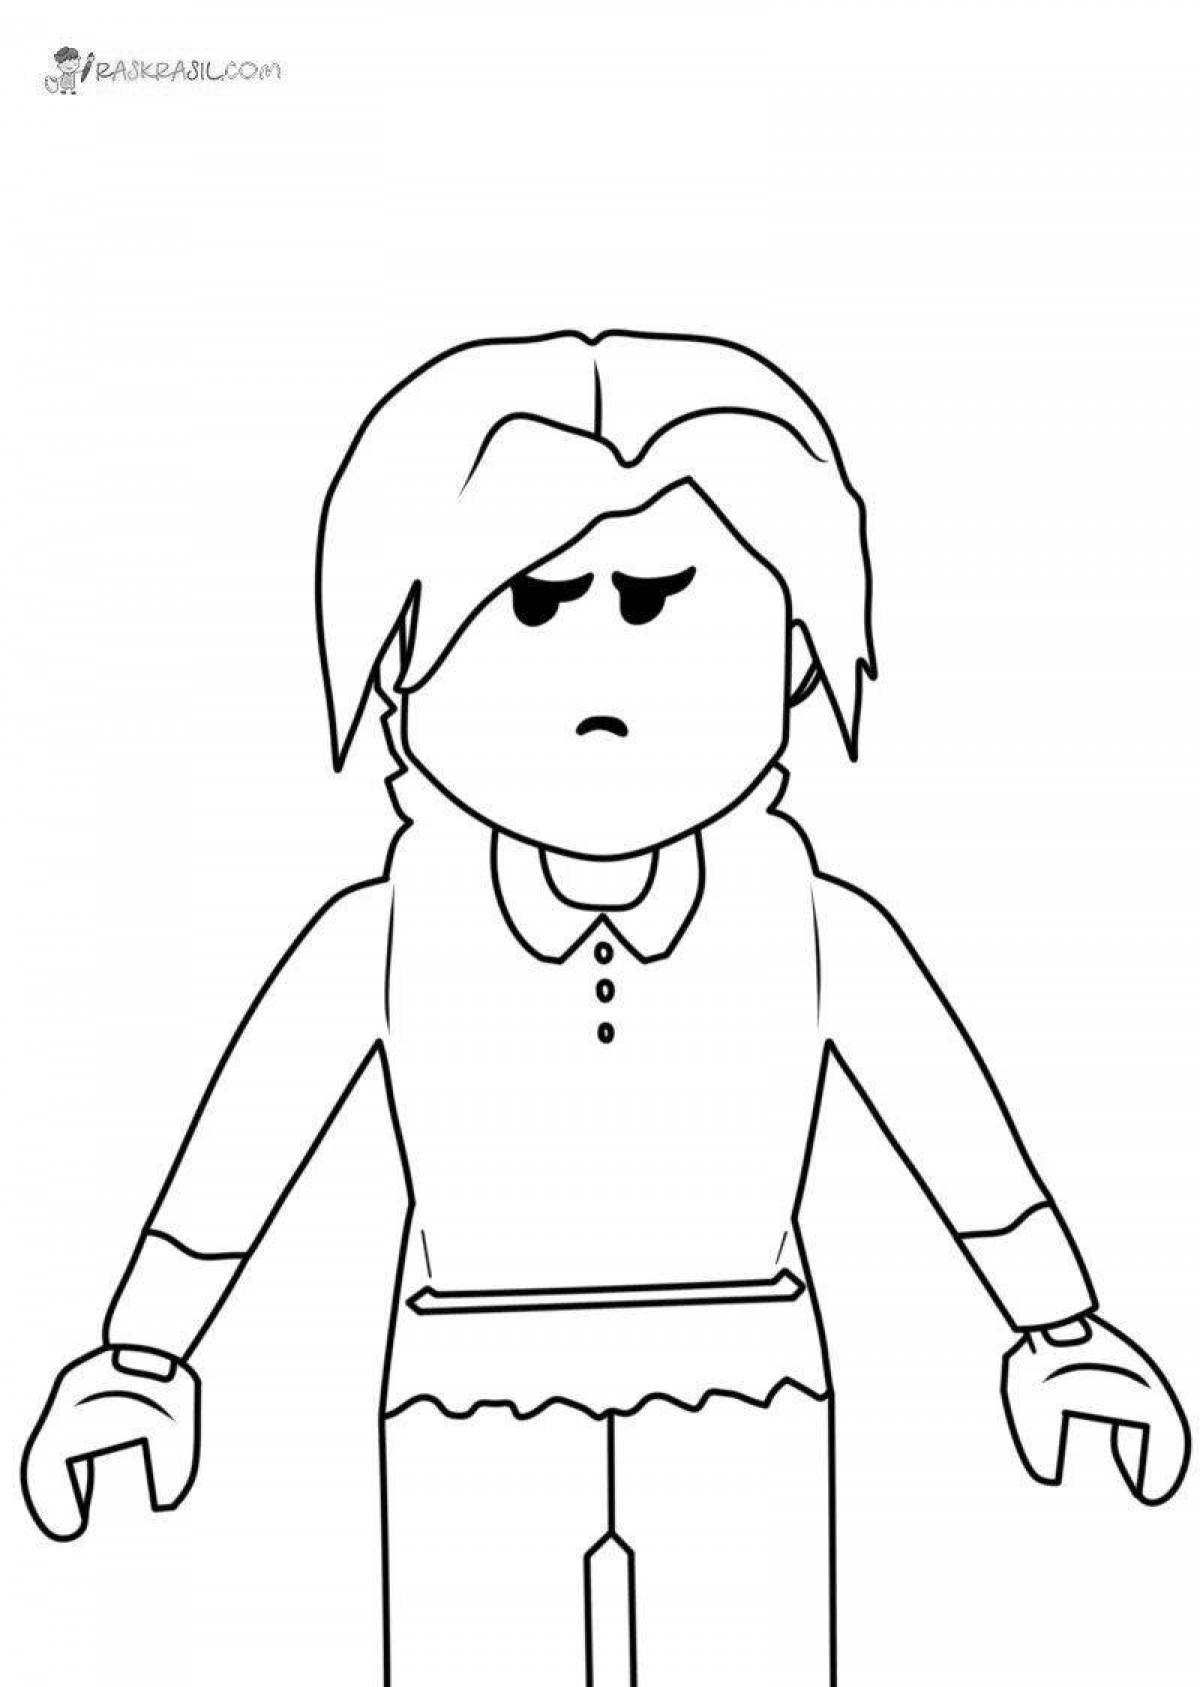 Entertaining roblox face coloring page